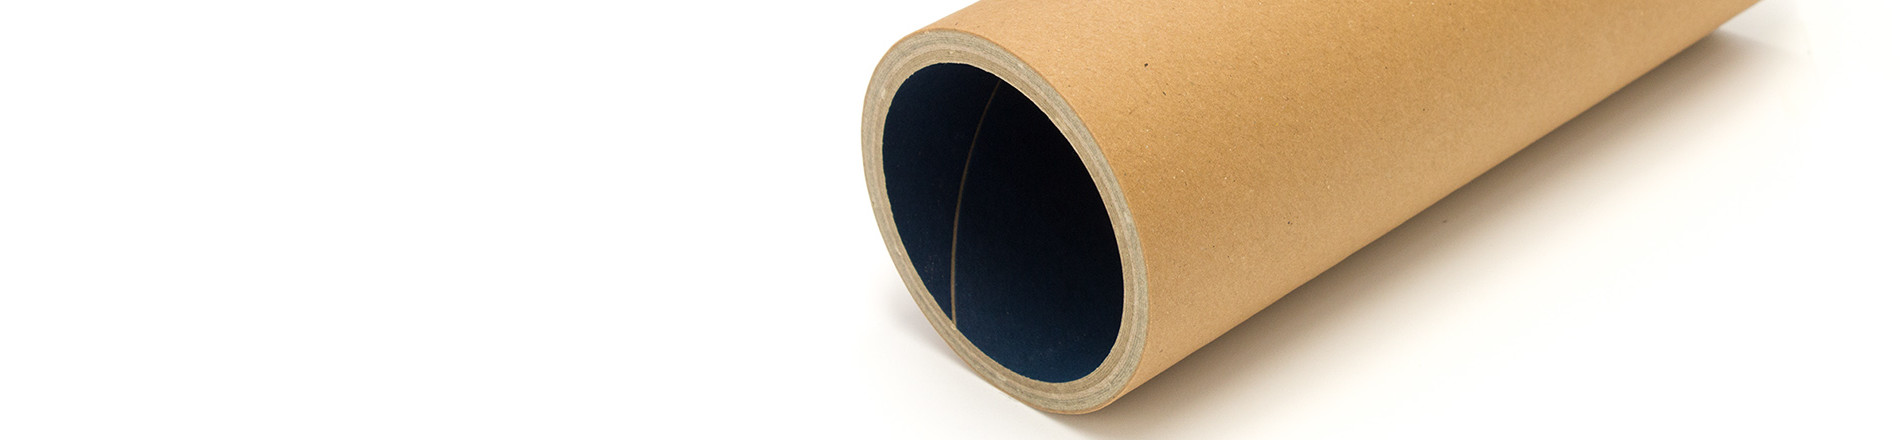 Paper cores for films and foils and flexible packaging